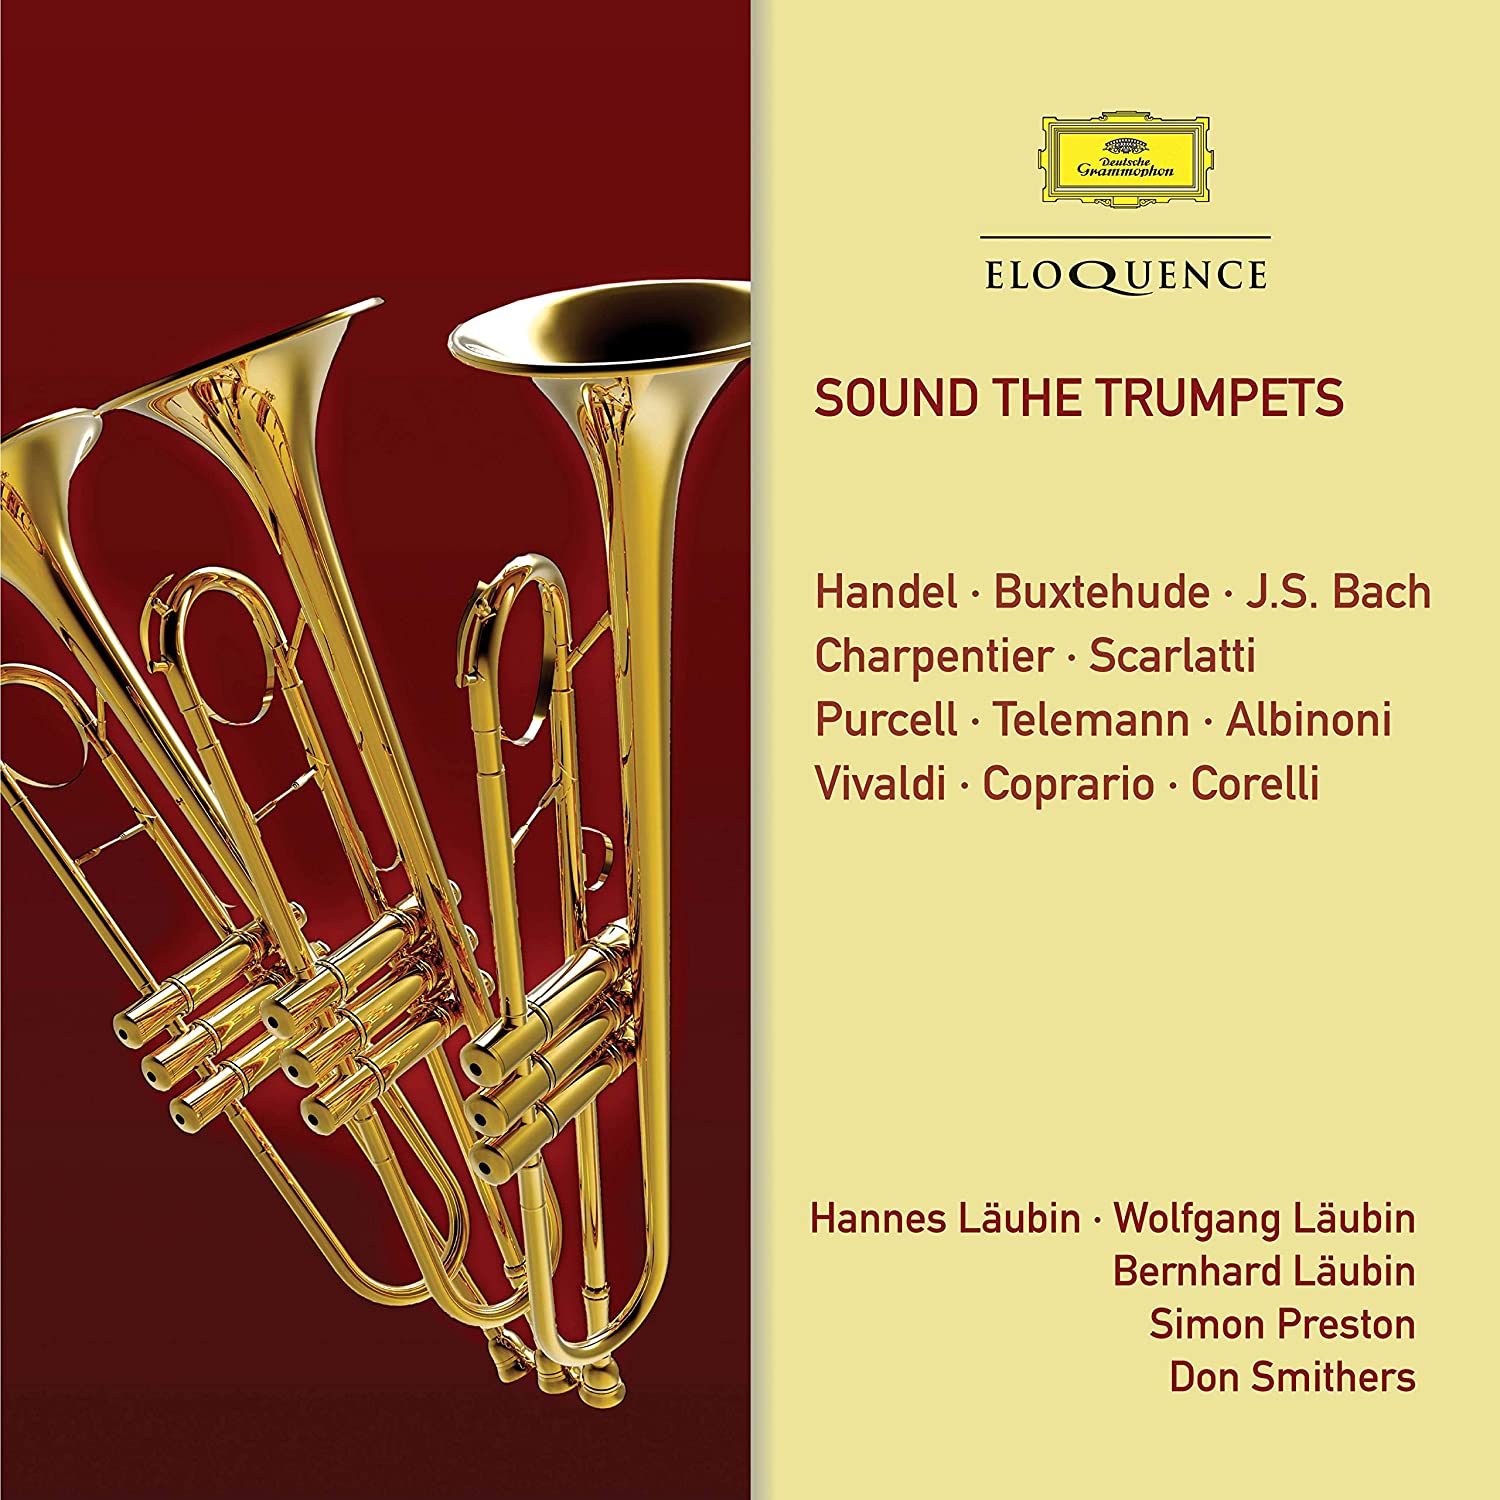 AND　World　–　CDS)　ORGAN　TRUMPETS　(2　SPECTACULAR　SOUND　TRUMPET　THE　ClassicSelect